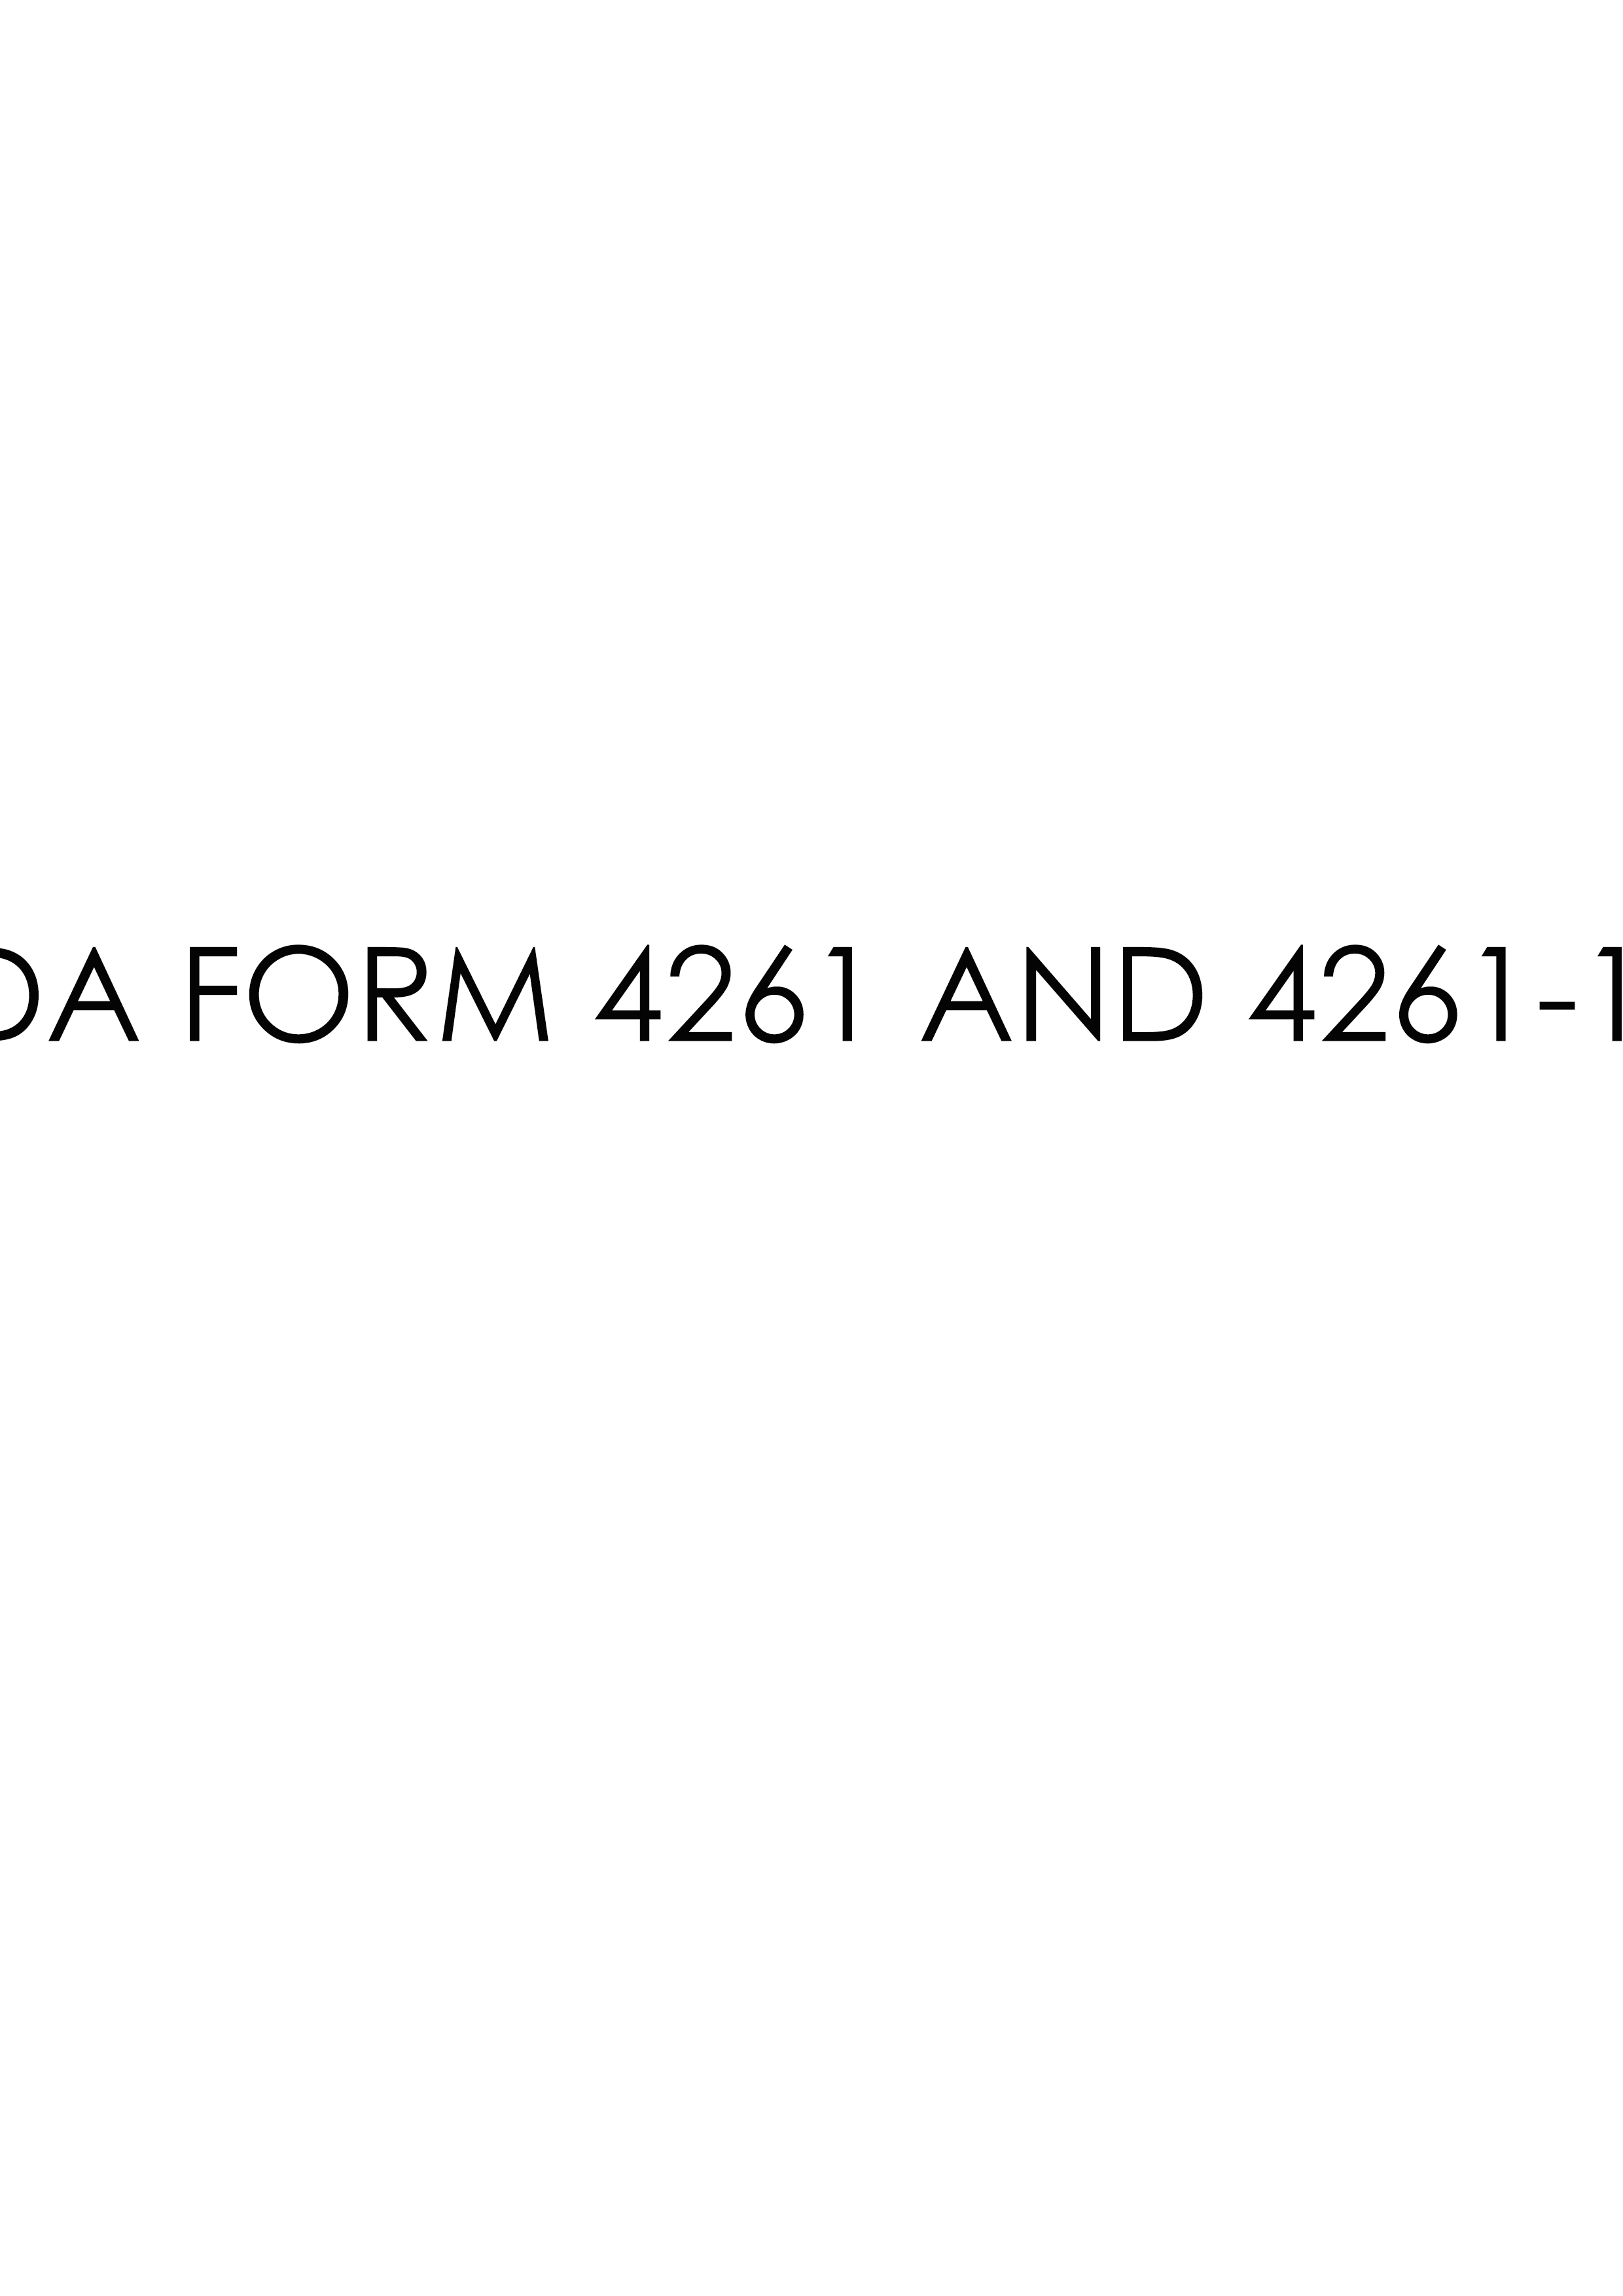 Download Fillable da Form 4261 AND 4261-1